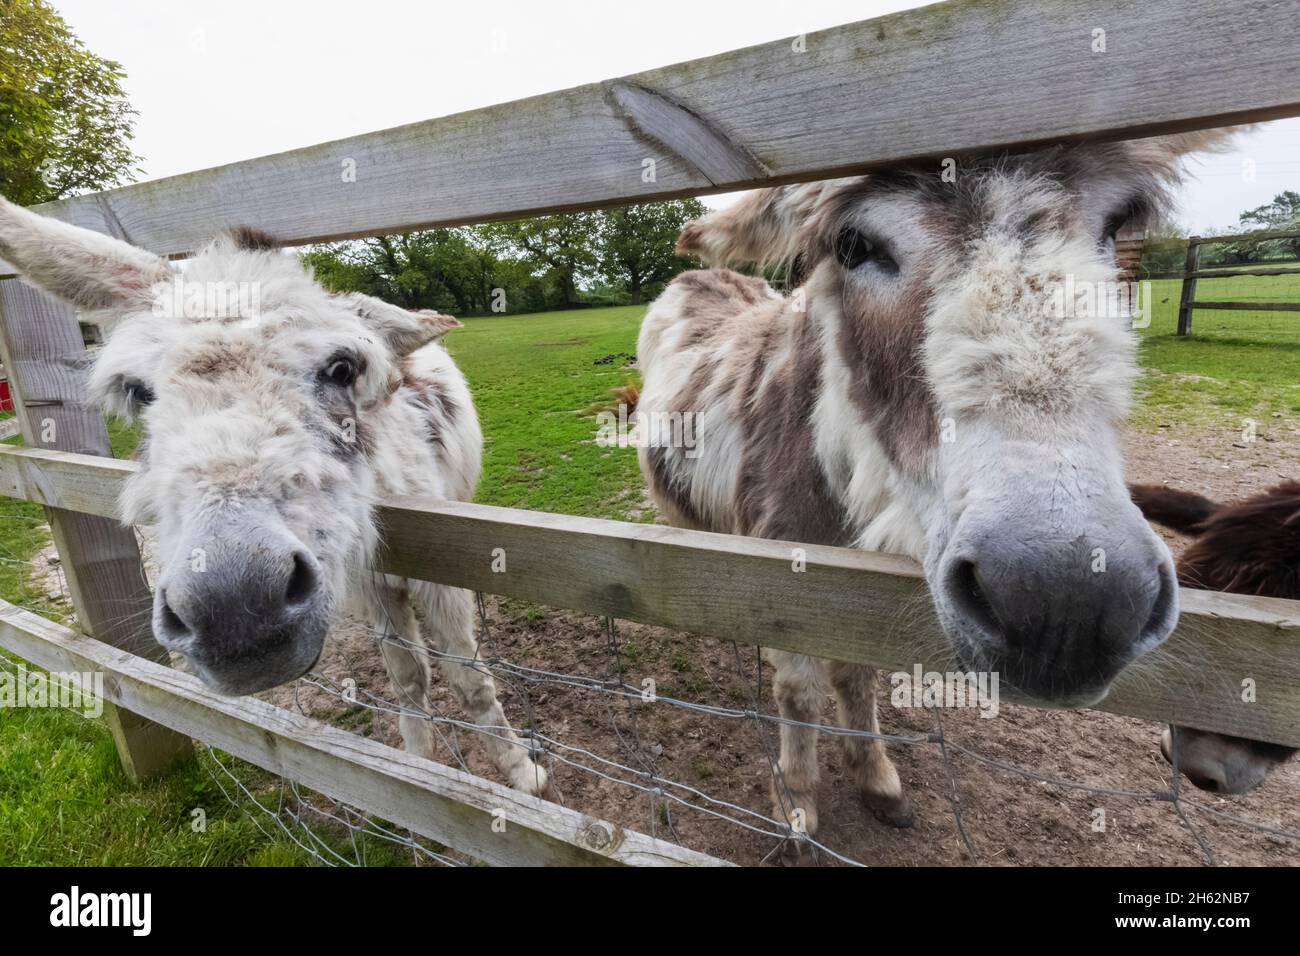 england,hampshire,new forest,new milton,the sammy miller motorcycle museum,the animal farm,donkeys Stock Photo